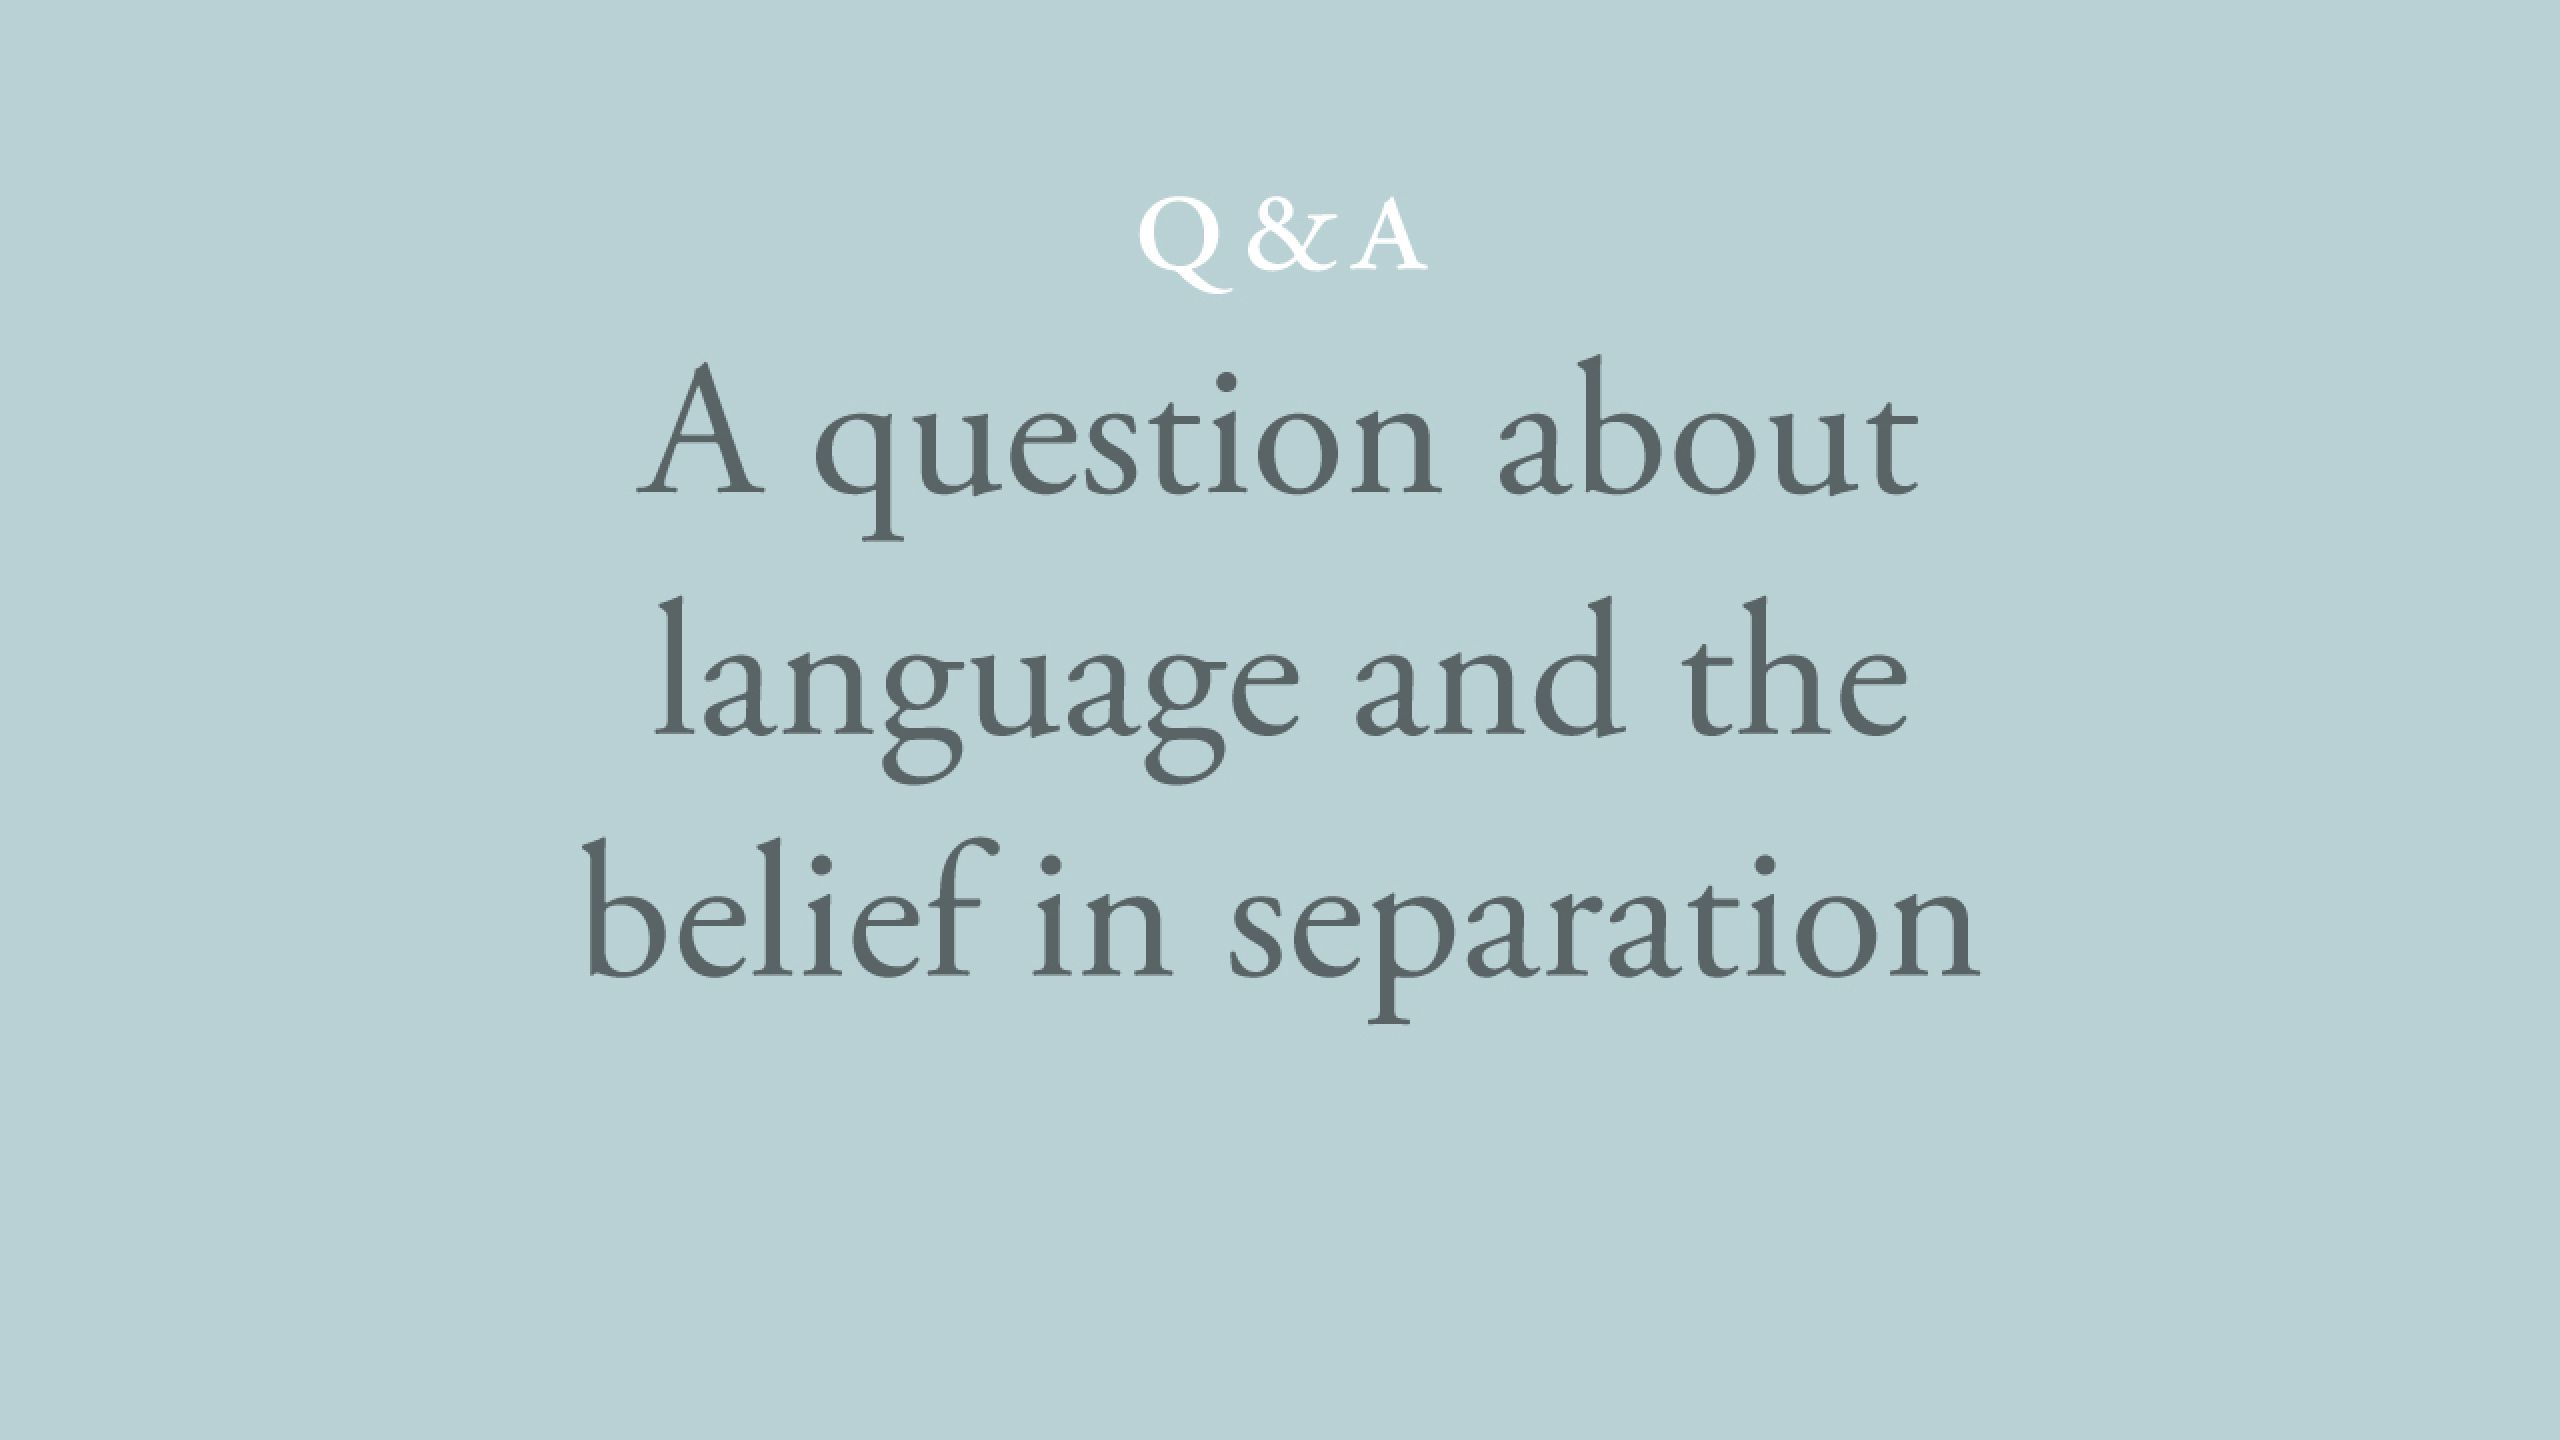 Would you agree that language is at the heart of the belief in separation? 